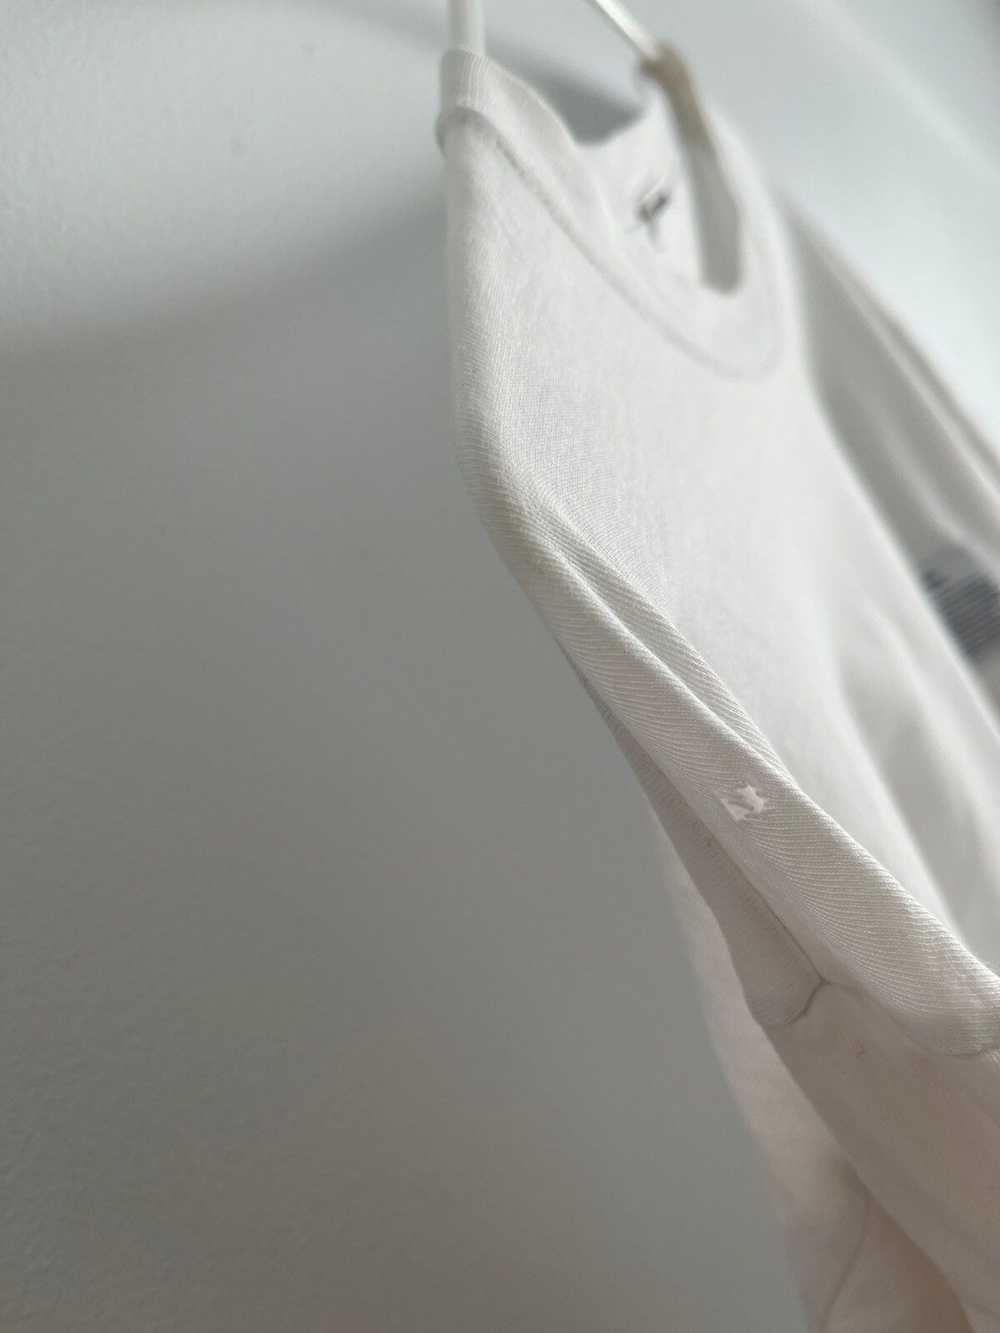 Undercover Undercover SS13 double layered tshirt - image 6